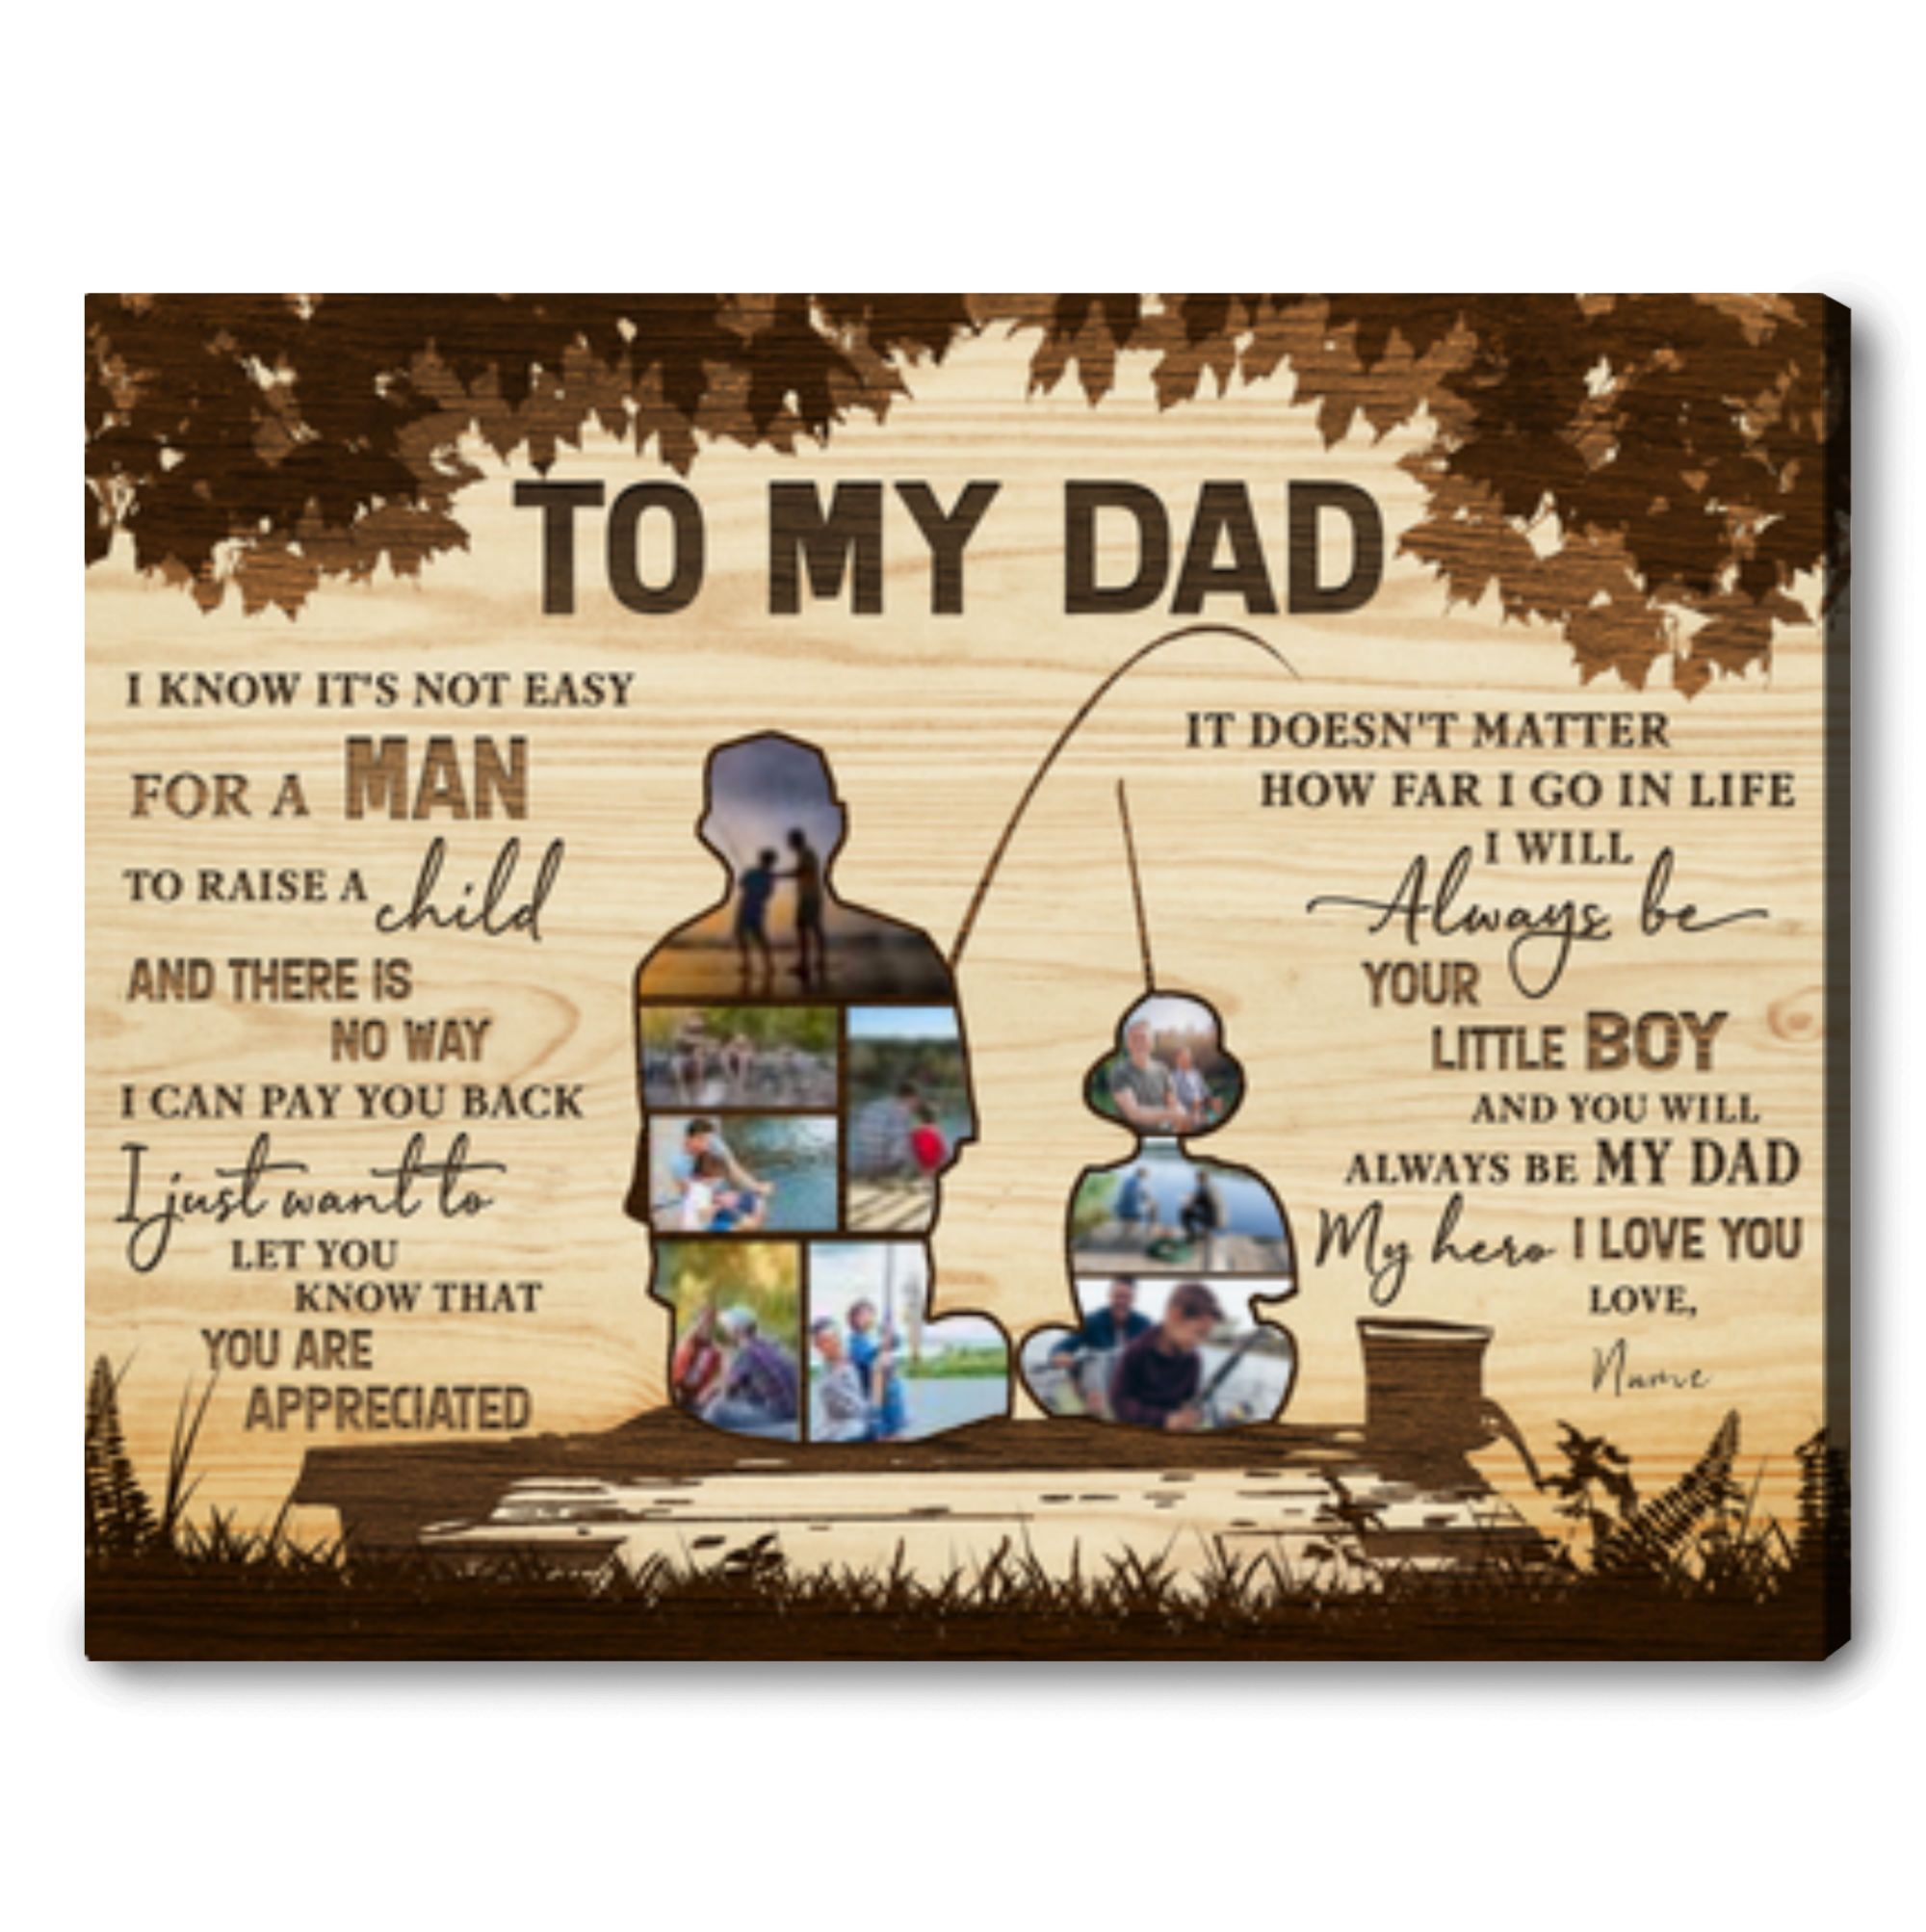 personalized dad canvas father's day gift fishing to my dad canvas print 01